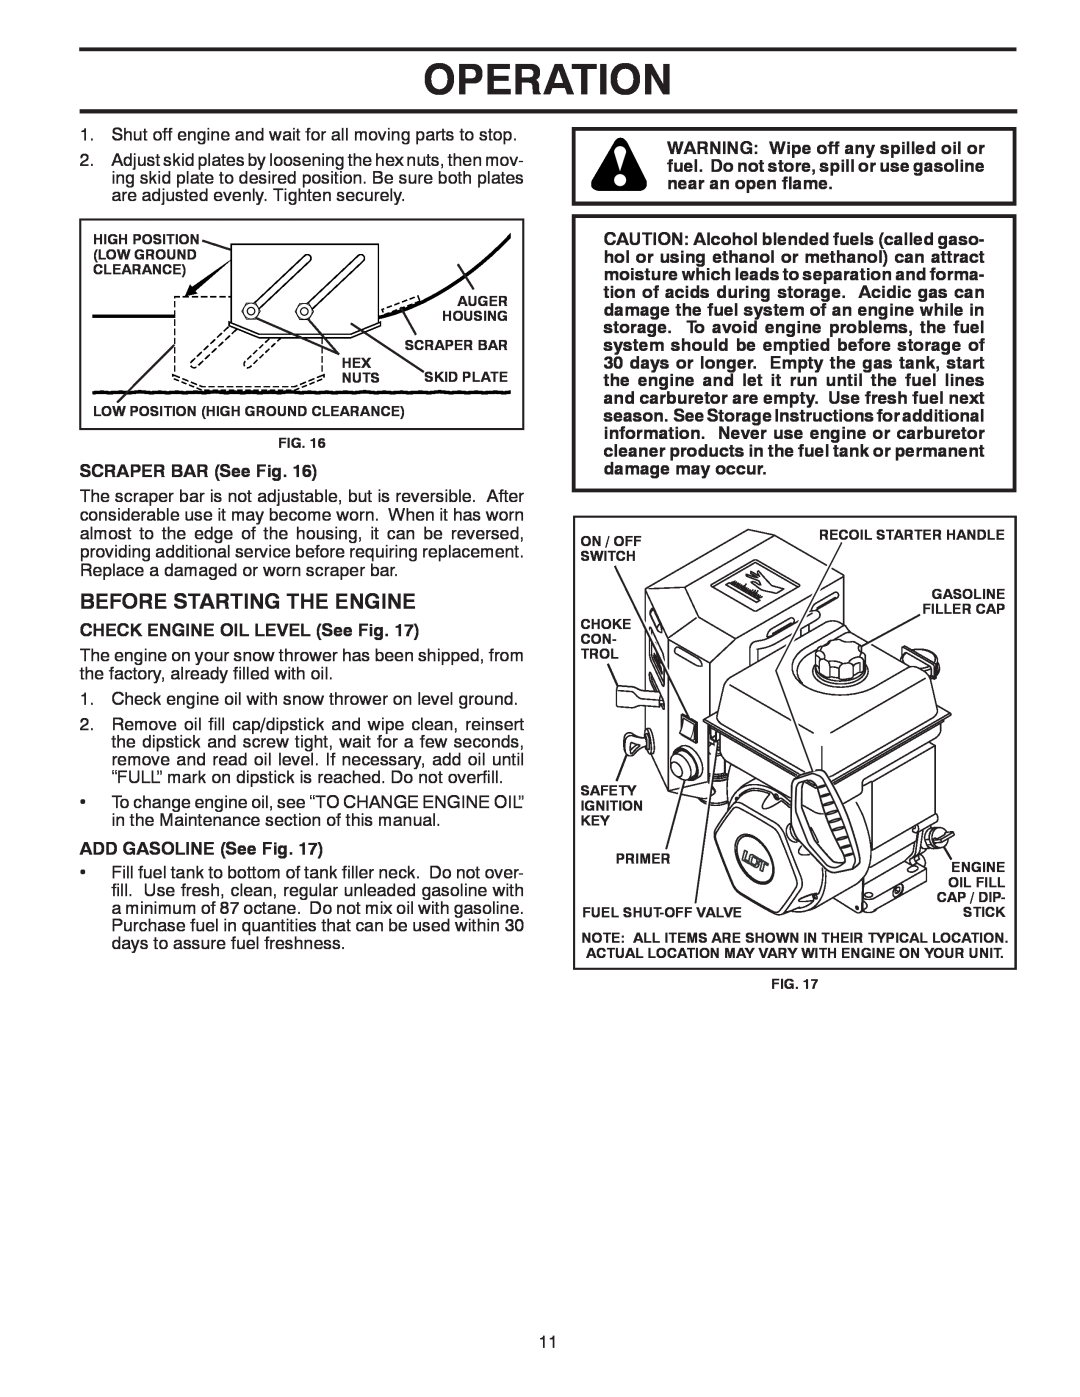 Poulan 421888 owner manual Before Starting The Engine, Operation, SCRAPER BAR See Fig, CHECK ENGINE OIL LEVEL See Fig 